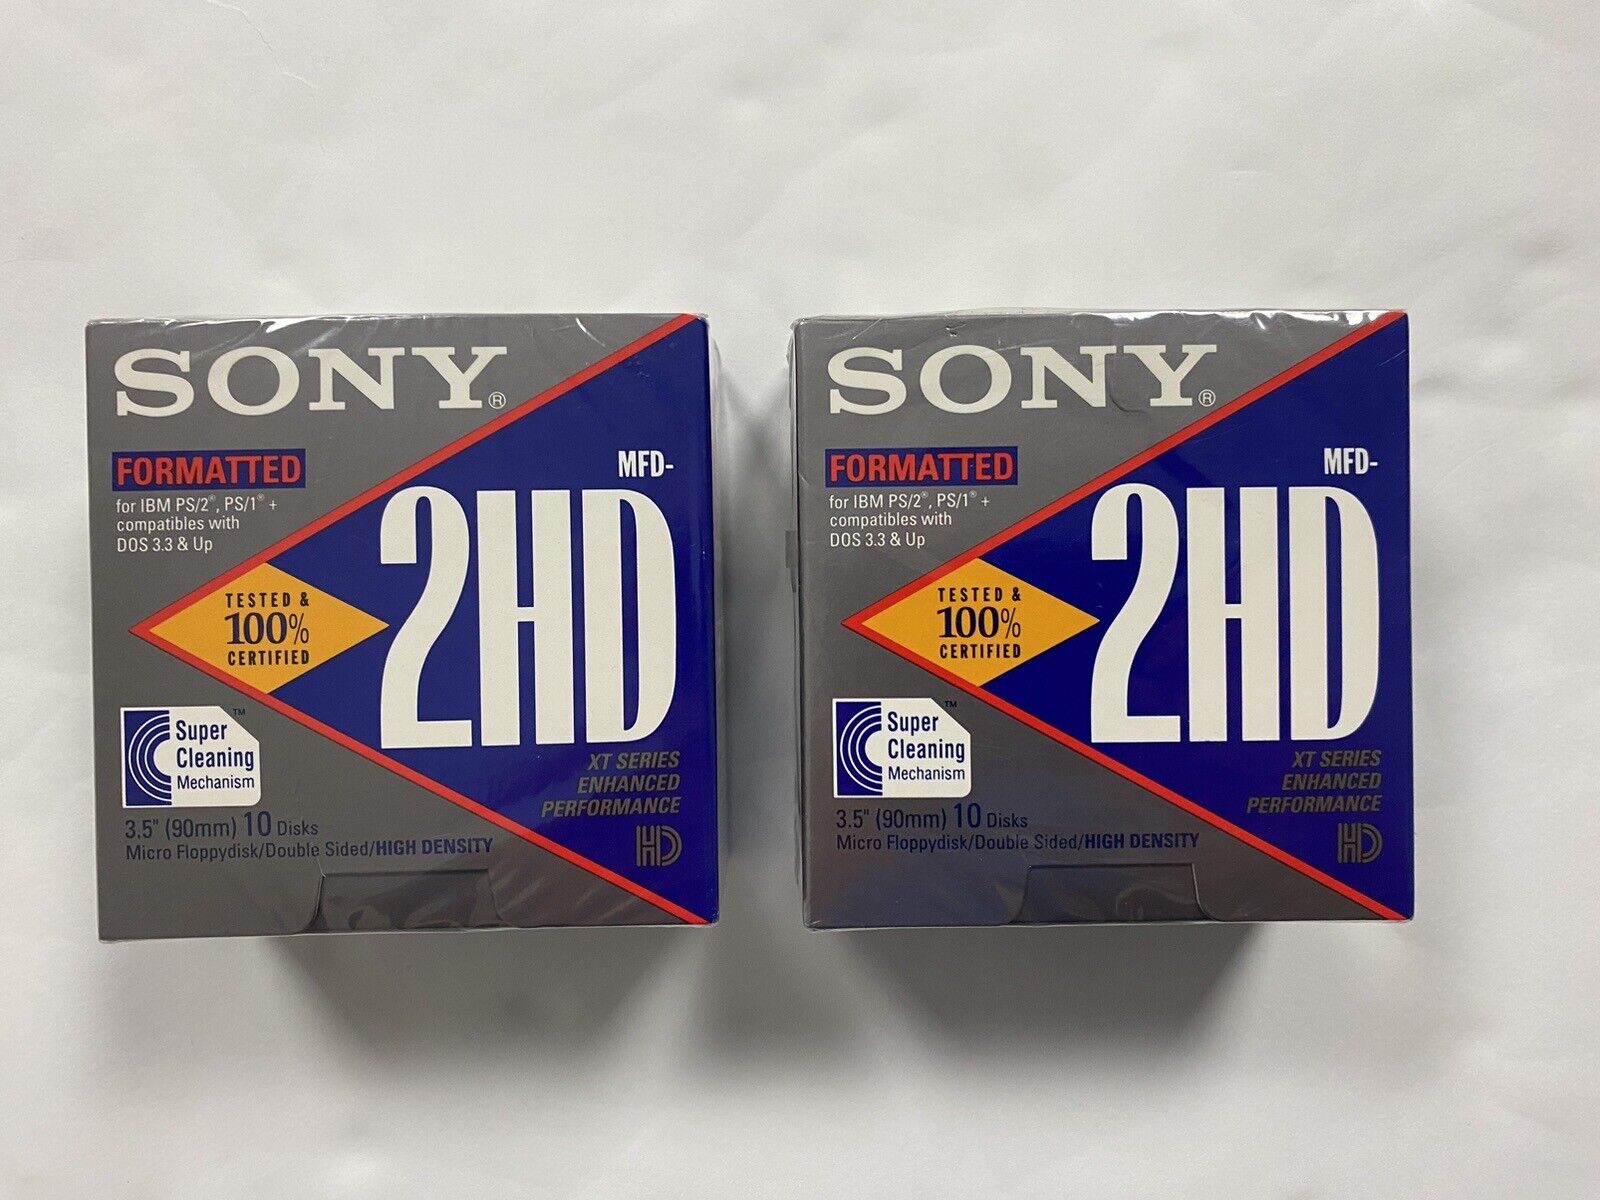 A Lot Of 2 Packs Micro floppydisk Double Sided XT Series Sony Formatted MFD-2HD